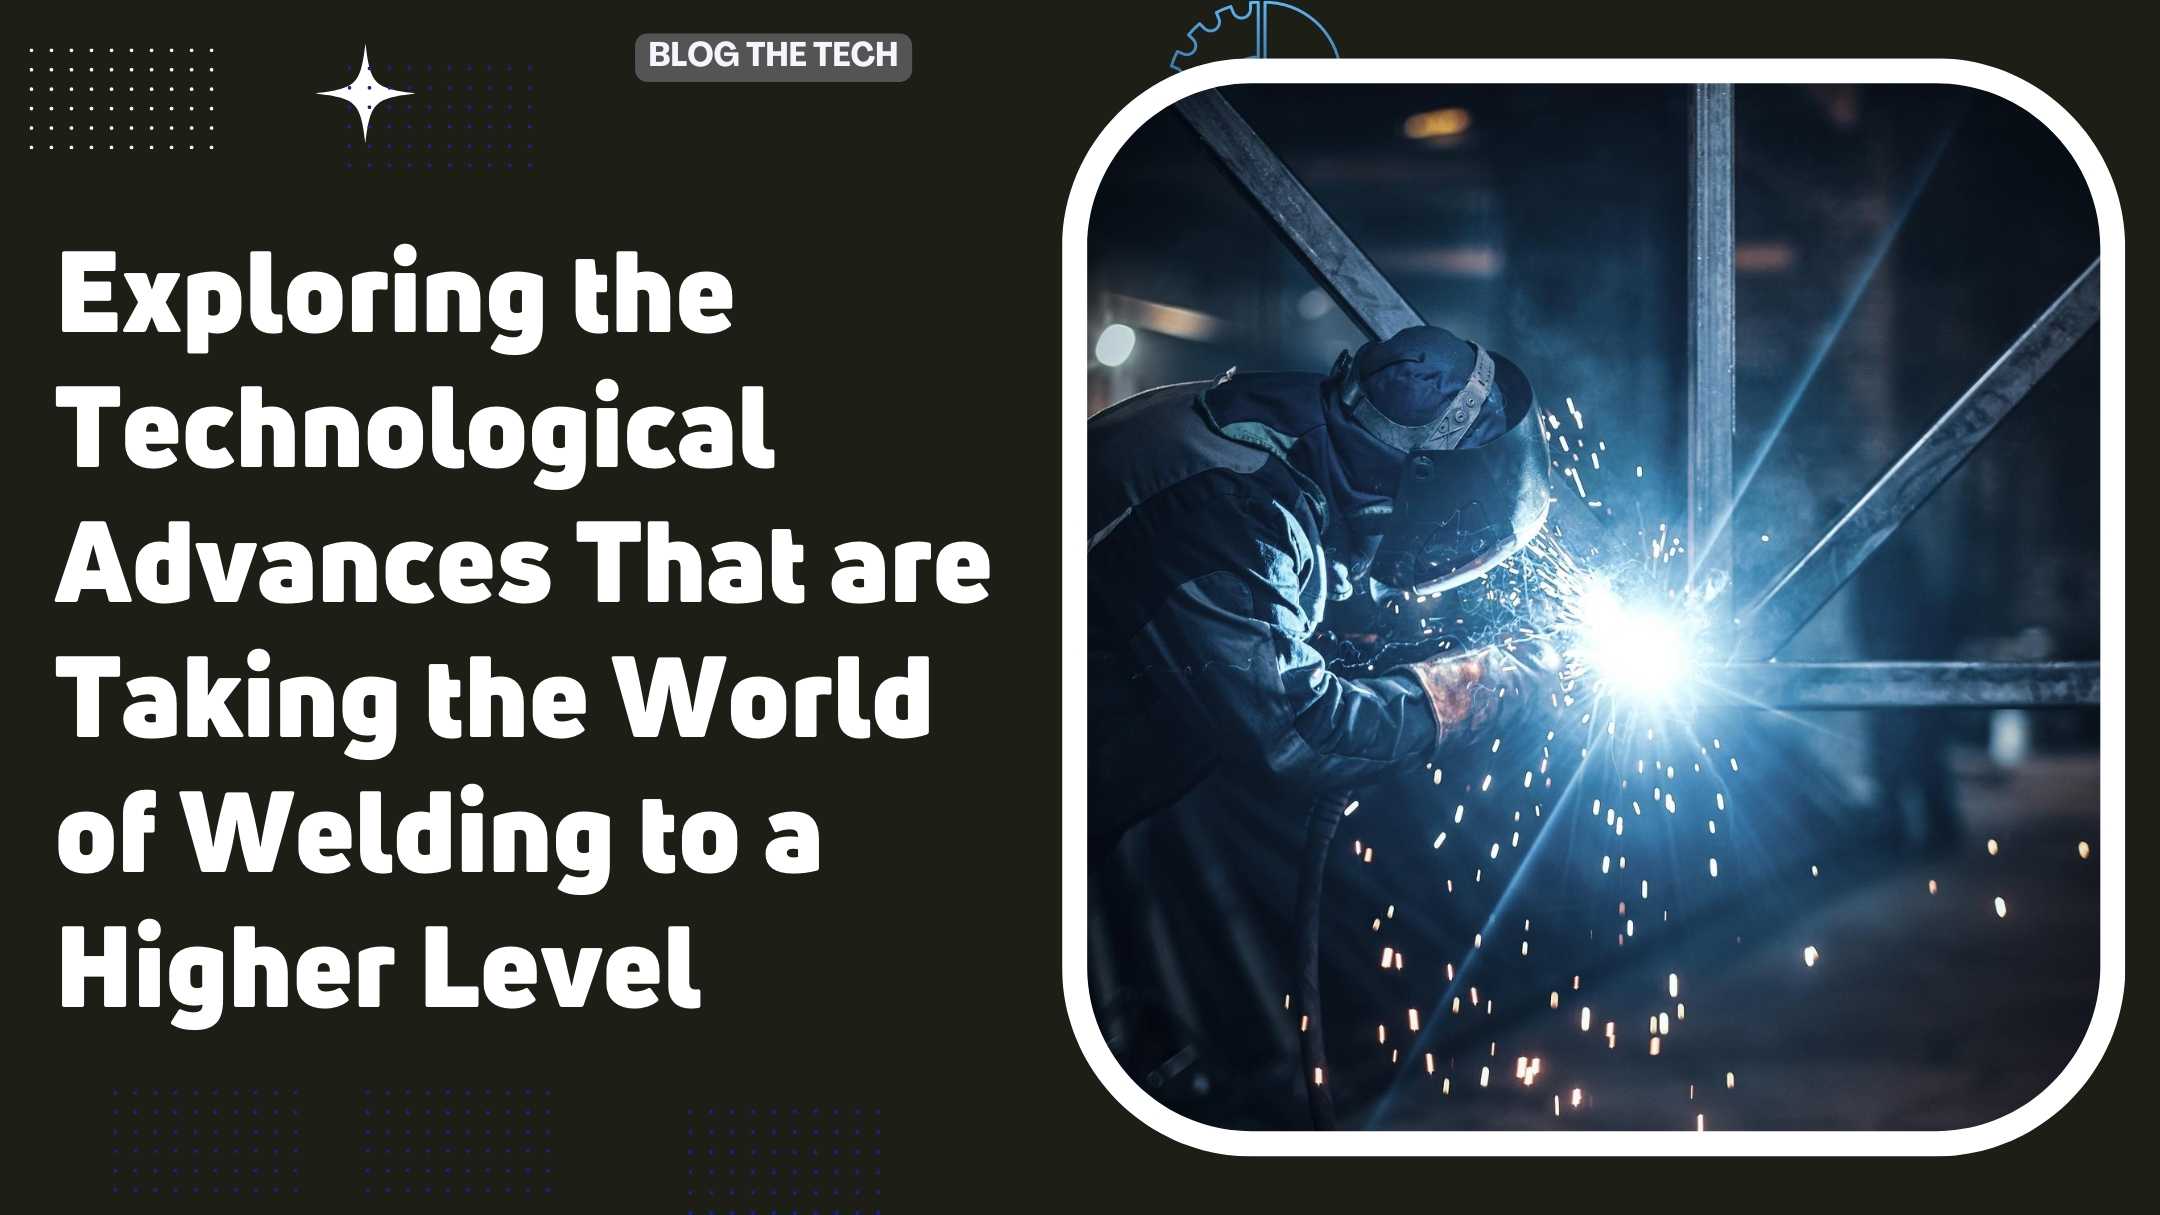 Exploring the Technological Advances That are Taking the World of Welding to a Higher Level